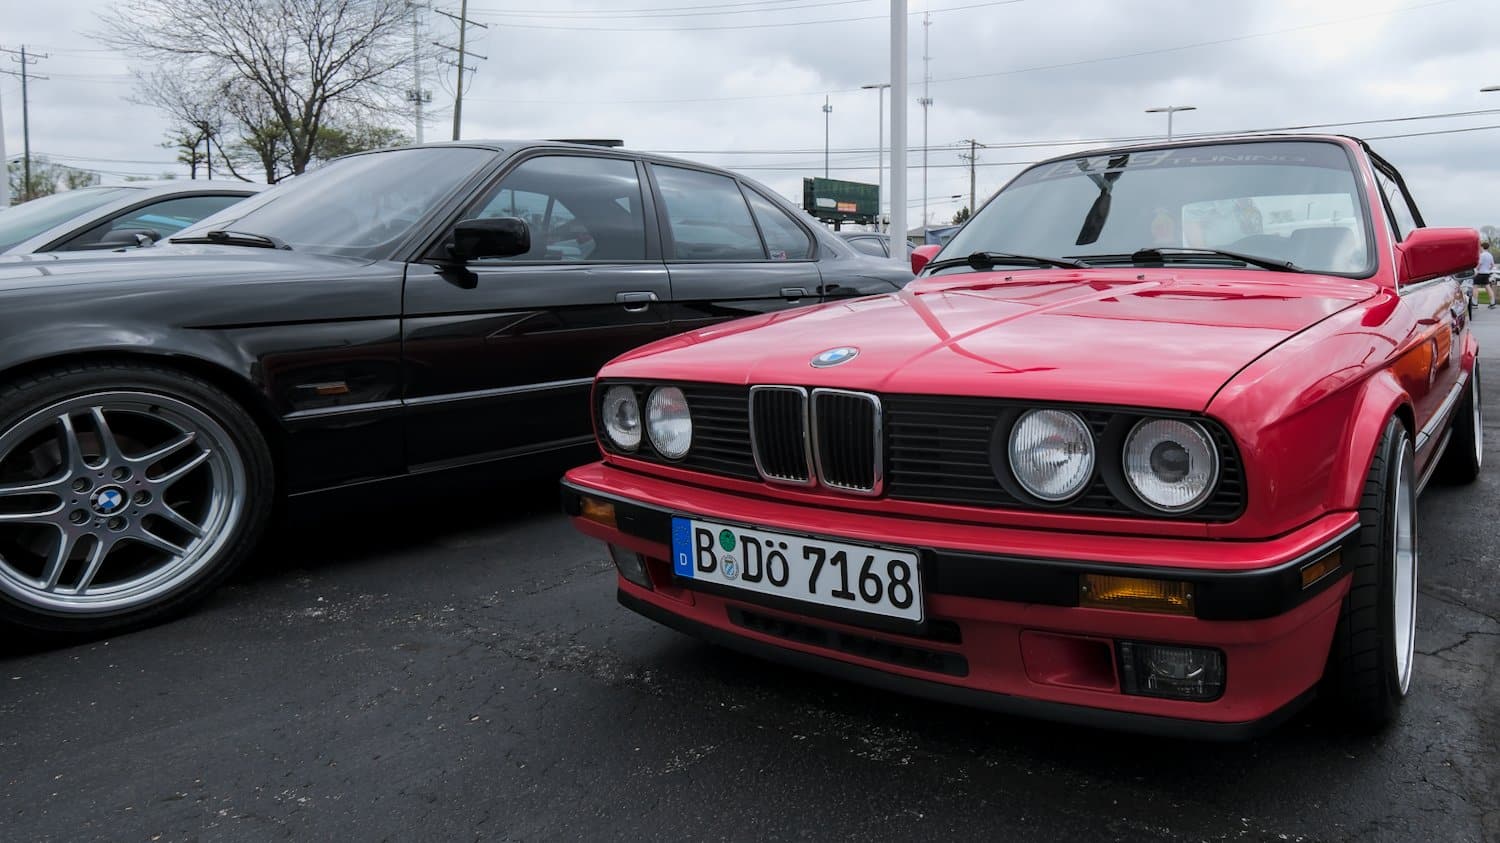 Classic red BMW 3-series convertible.